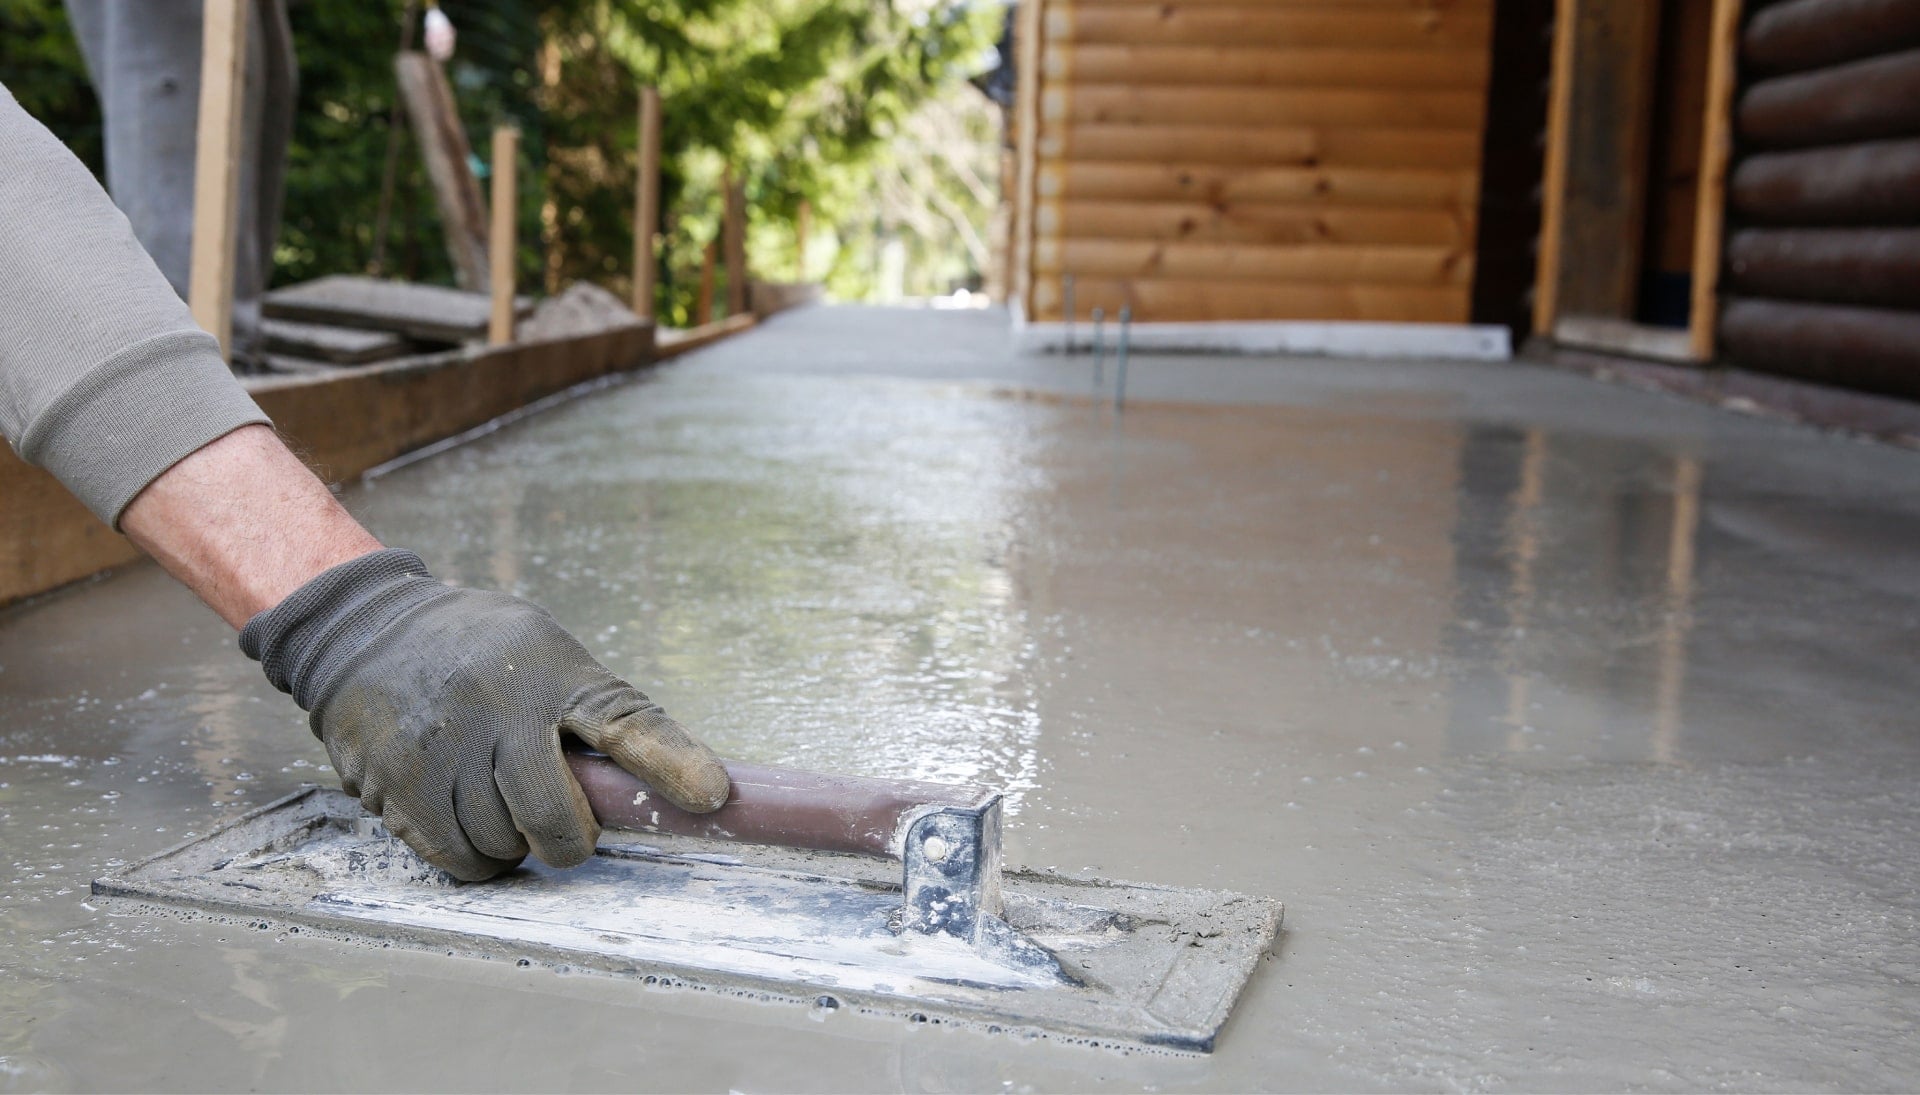 Smooth and Level Your Floors with Precision Concrete Floor Leveling Services in Mesa, AZ - Eliminate Uneven Surfaces, Tripping Hazards, and Costly Damages with State-of-the-Art Equipment and Skilled Professionals.